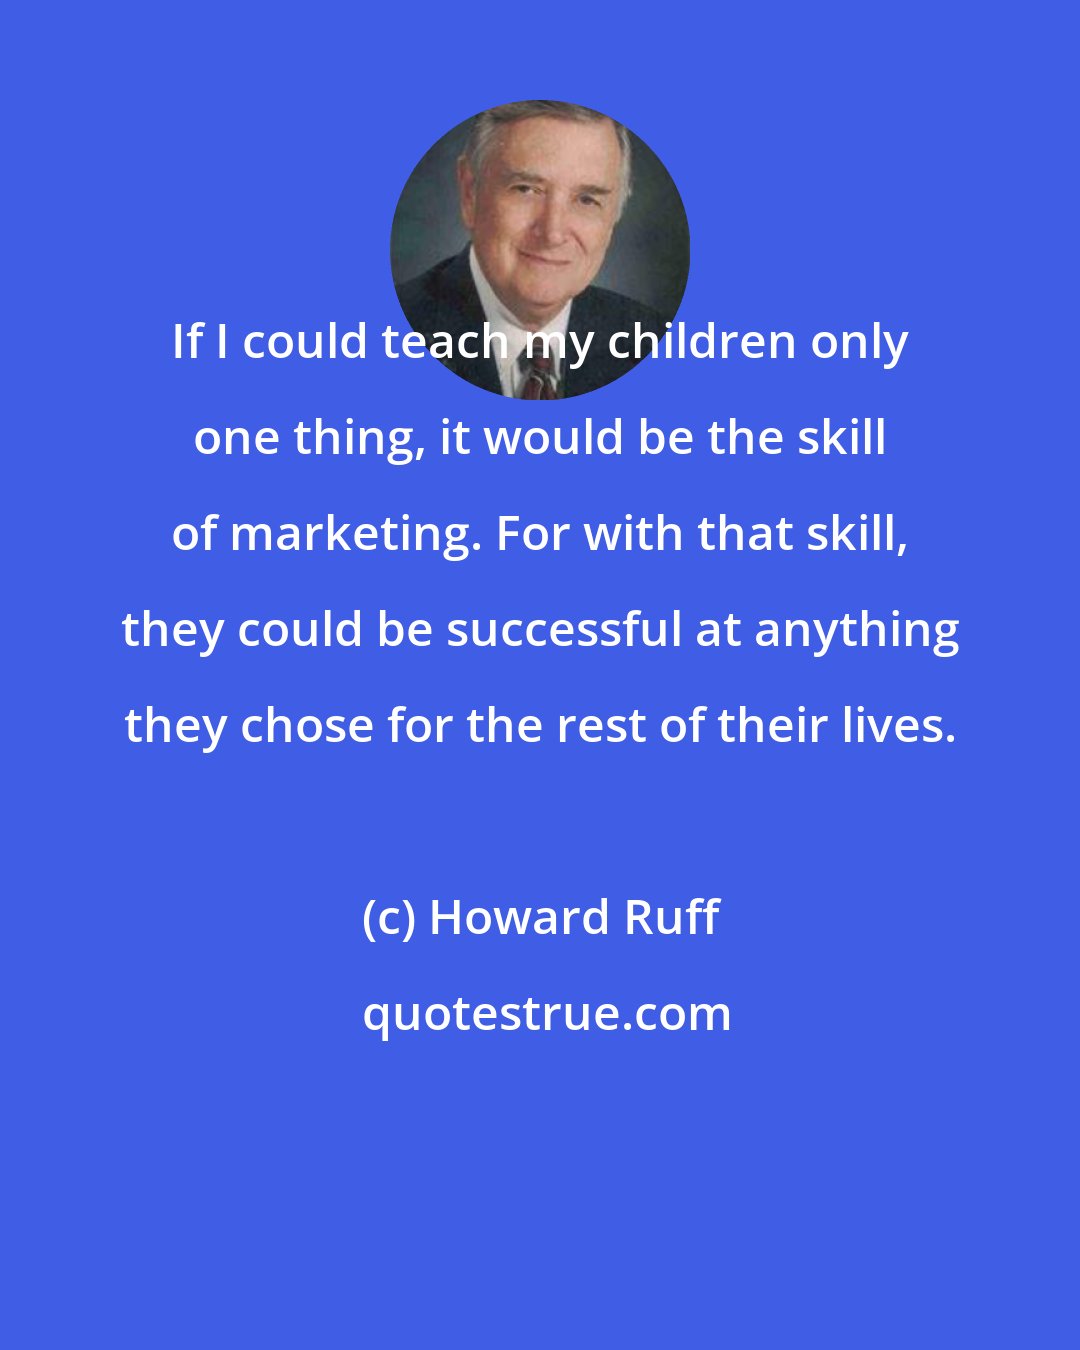 Howard Ruff: If I could teach my children only one thing, it would be the skill of marketing. For with that skill, they could be successful at anything they chose for the rest of their lives.